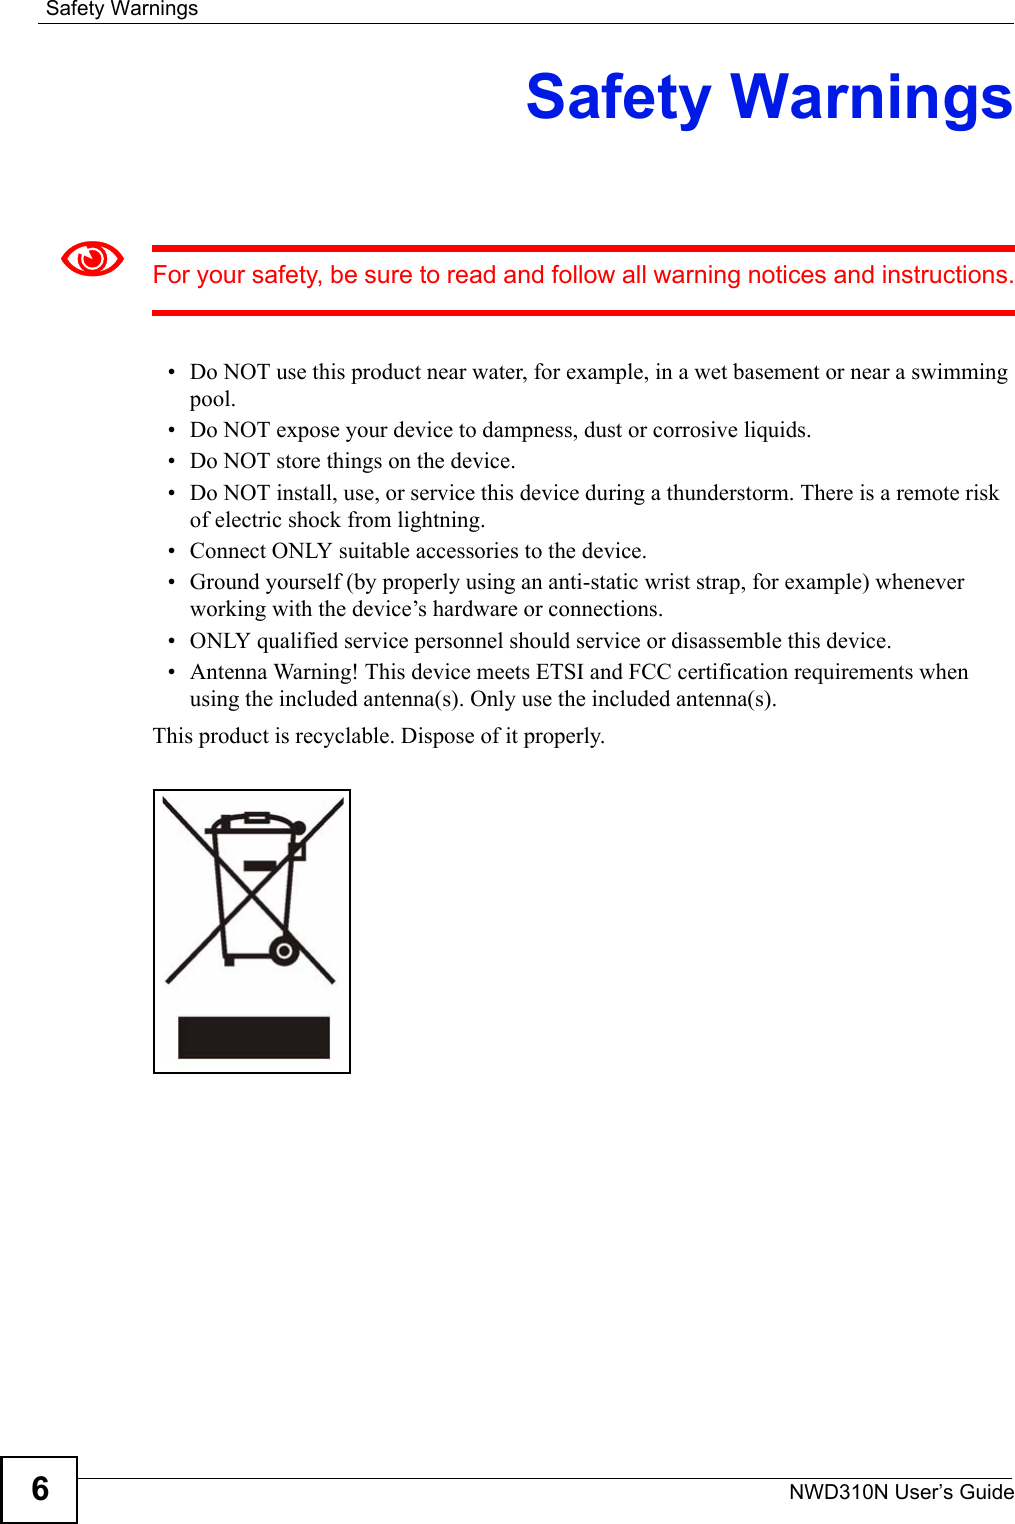 Safety WarningsNWD310N User’s Guide6Safety Warnings1For your safety, be sure to read and follow all warning notices and instructions.• Do NOT use this product near water, for example, in a wet basement or near a swimming pool.• Do NOT expose your device to dampness, dust or corrosive liquids.• Do NOT store things on the device.• Do NOT install, use, or service this device during a thunderstorm. There is a remote risk of electric shock from lightning.• Connect ONLY suitable accessories to the device.• Ground yourself (by properly using an anti-static wrist strap, for example) whenever working with the device’s hardware or connections.• ONLY qualified service personnel should service or disassemble this device.• Antenna Warning! This device meets ETSI and FCC certification requirements when using the included antenna(s). Only use the included antenna(s).This product is recyclable. Dispose of it properly.  